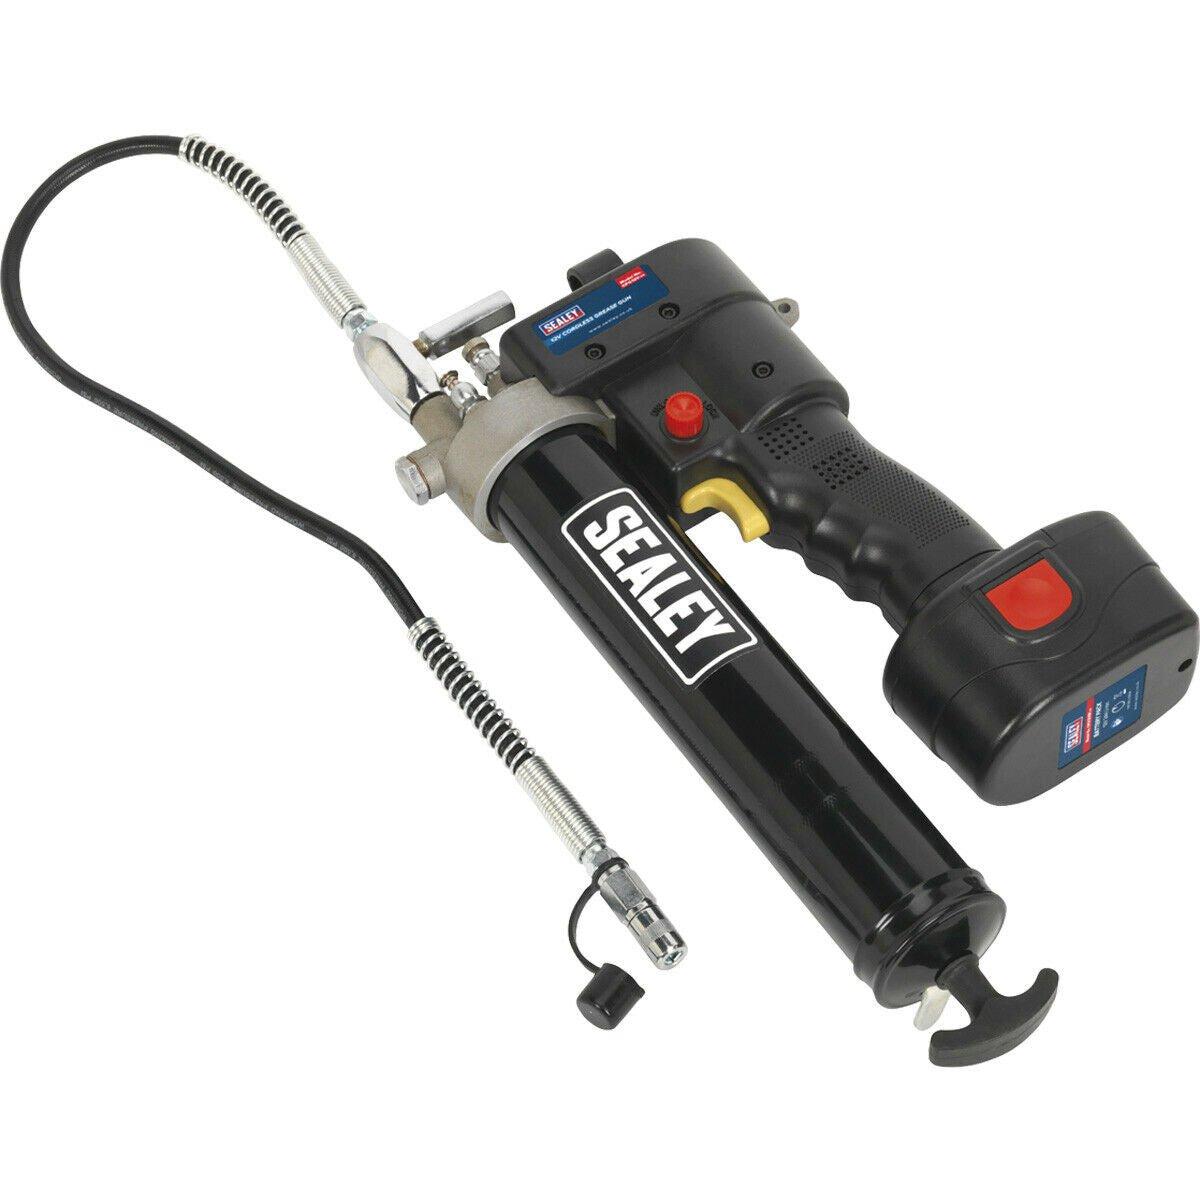 12V Cordless Grease Gun Kit - Holds 400g Cartridge - Includes Battery & Charger